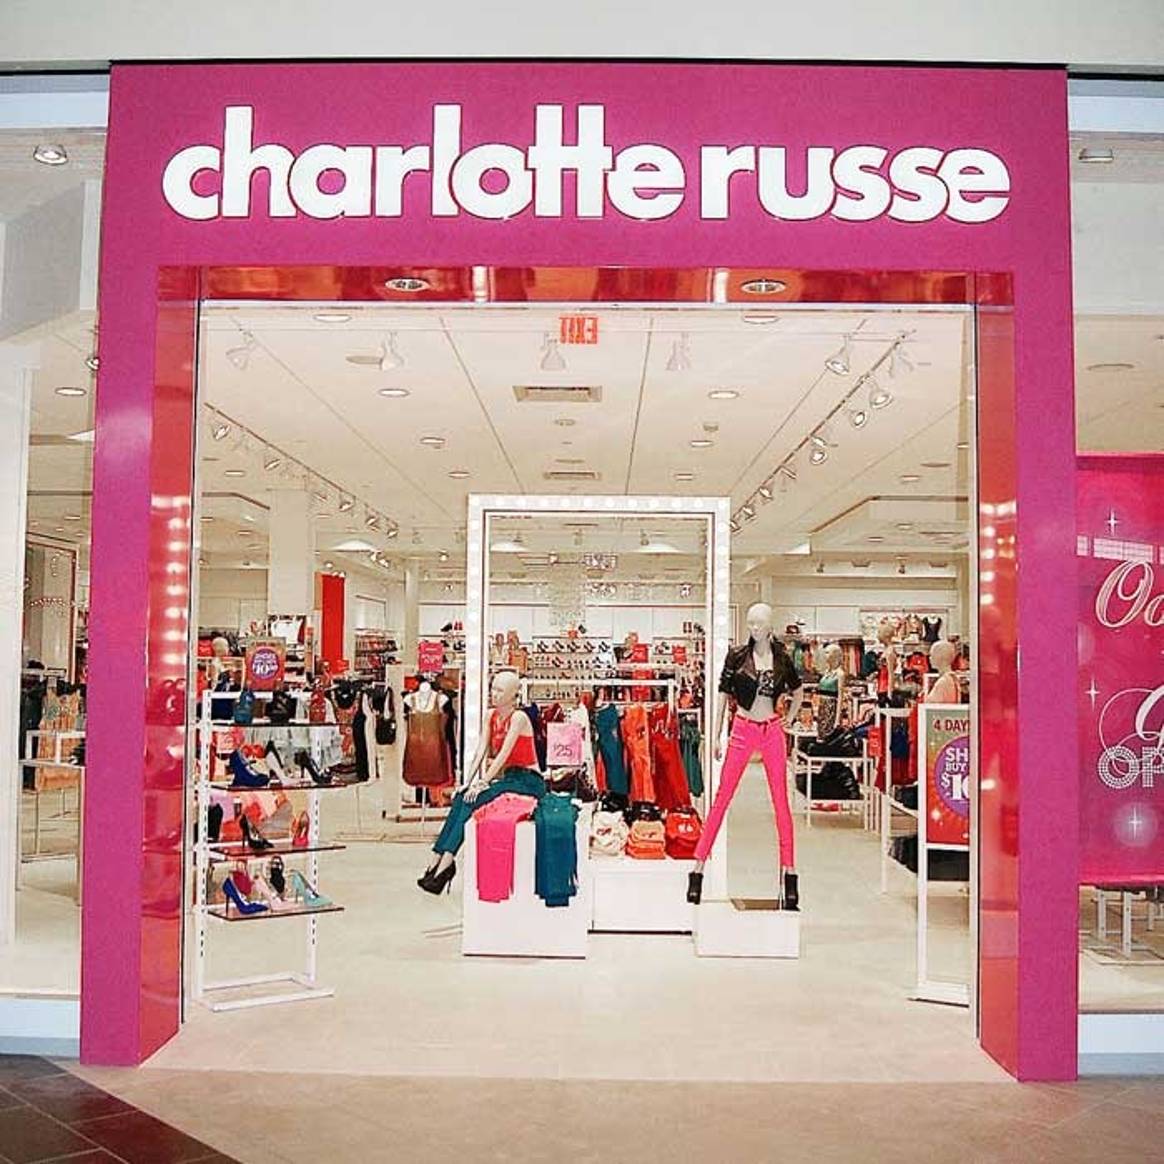 Charlotte Russe receives a downgrade rating from Moody's